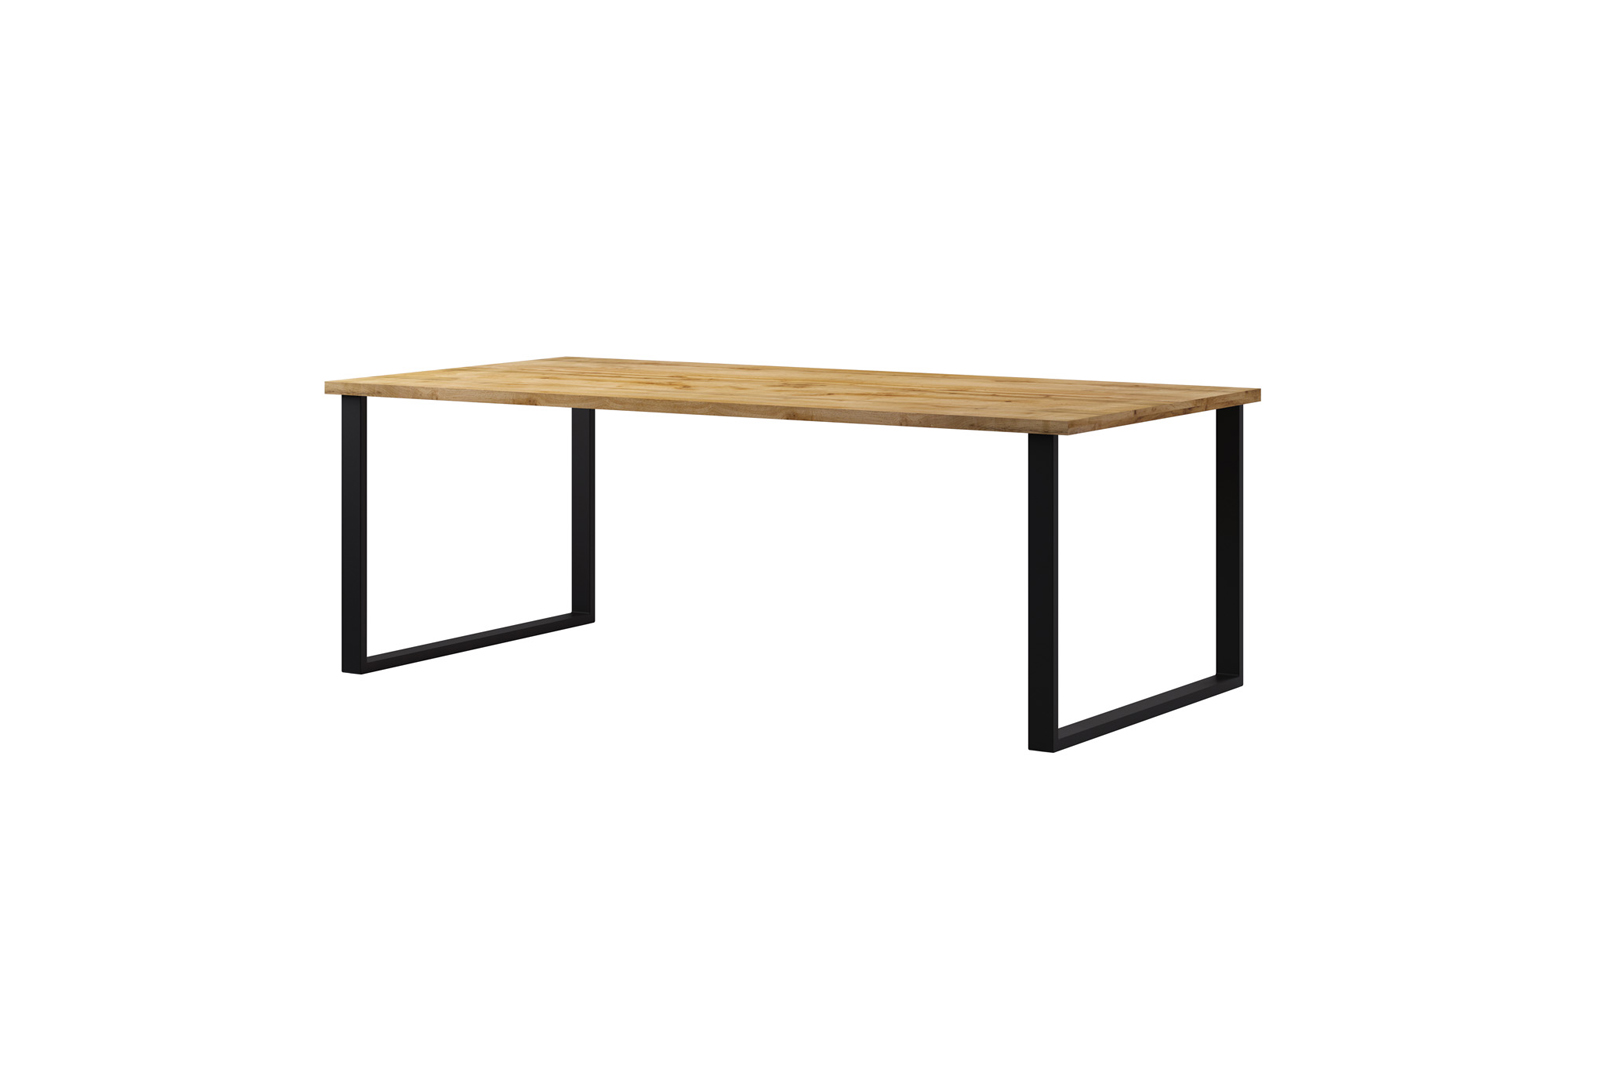 HALLE TABLE TYPE 94